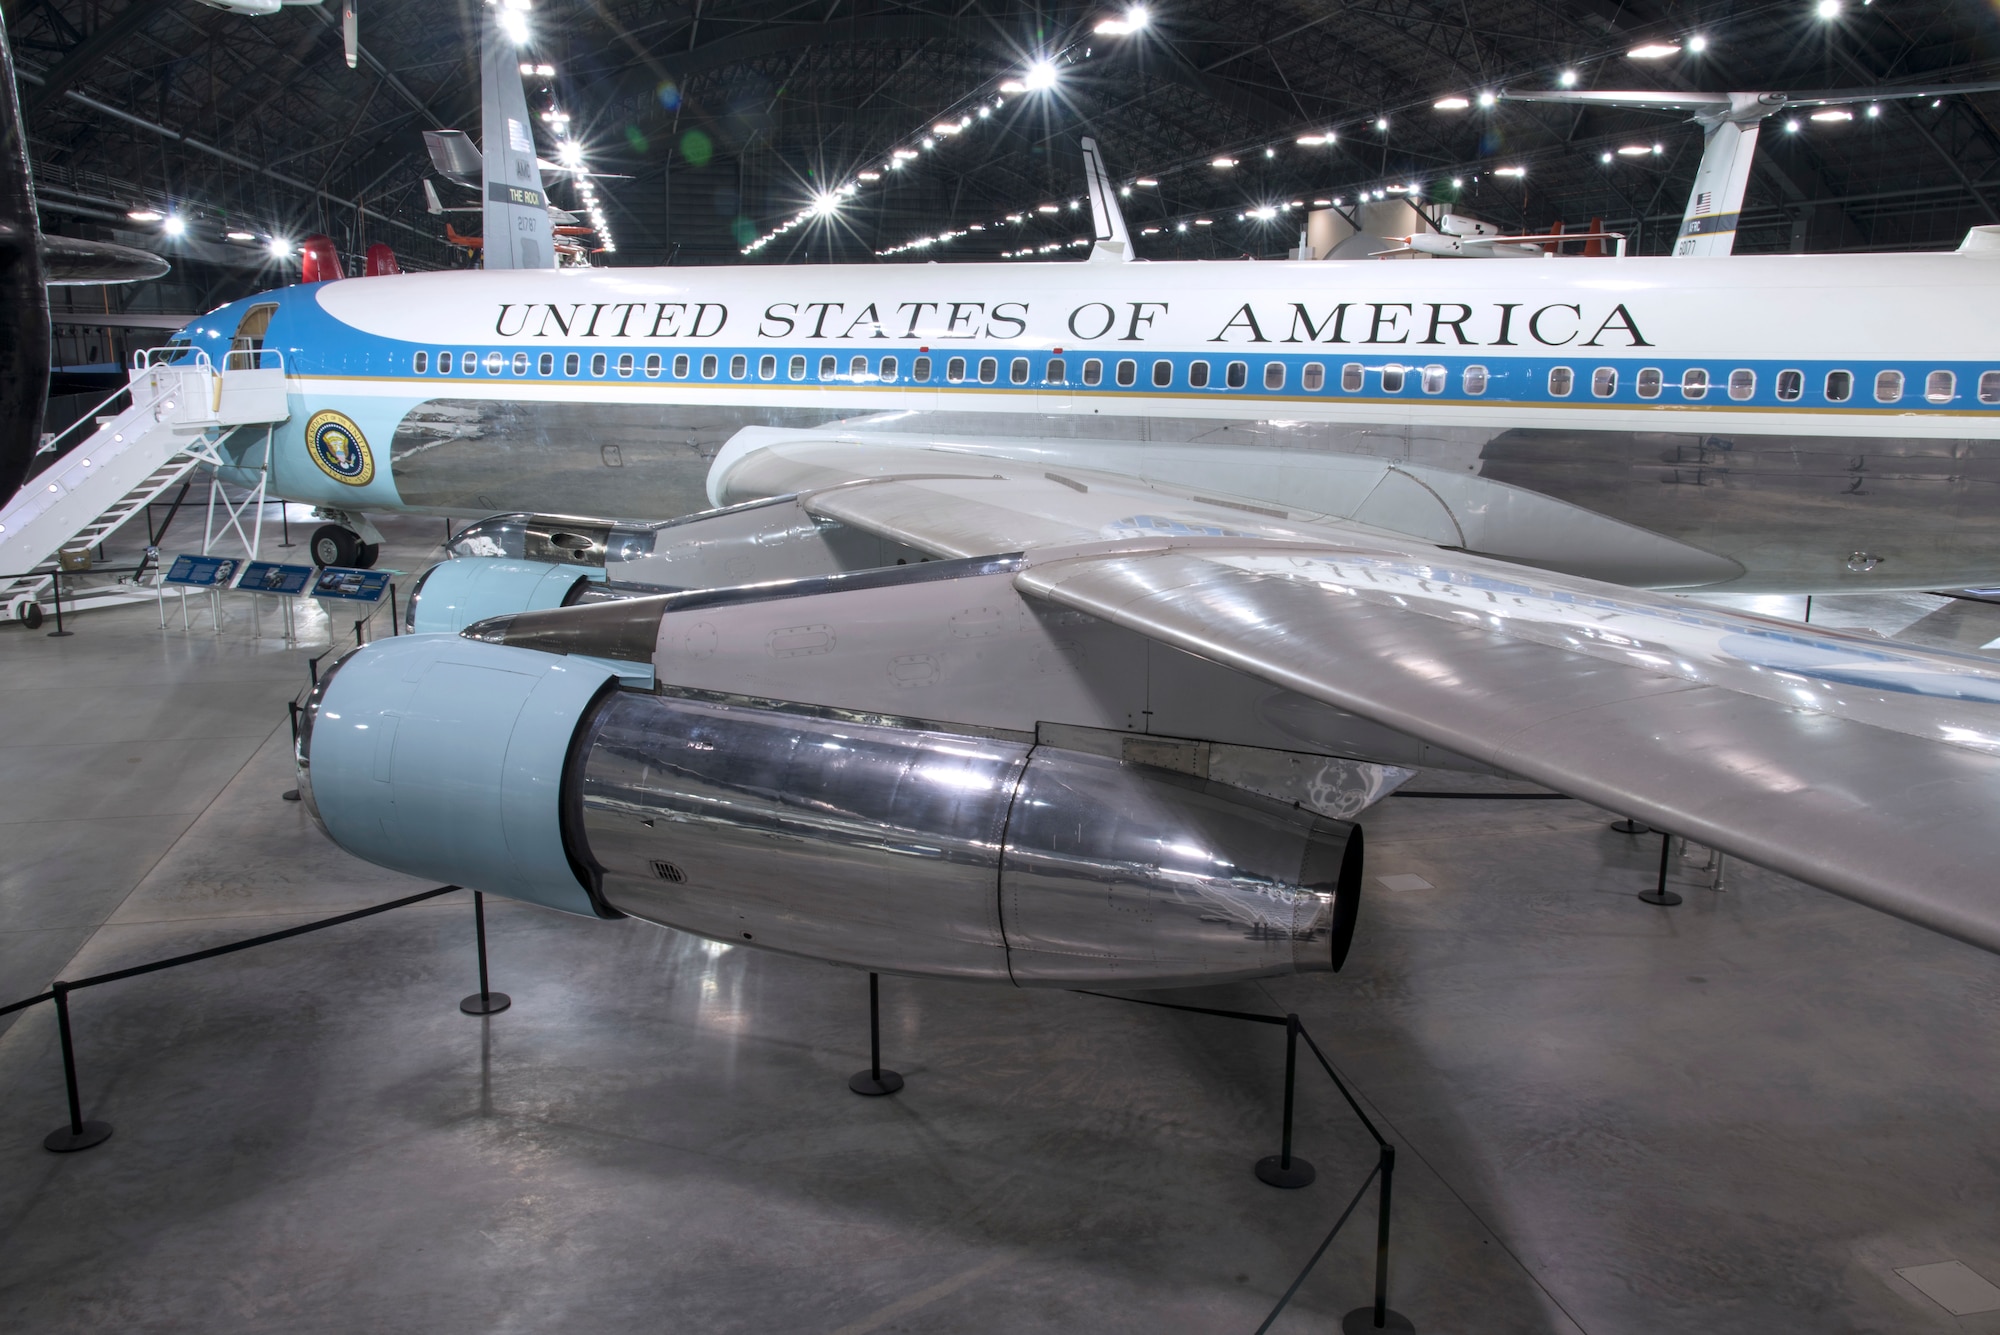 DAYTON, Ohio -- The Boeing VC-137C SAM 26000 on display in the Presidential Gallery at the National Museum of the United States Air Force. (U.S. Air Force photo by Ken LaRock)